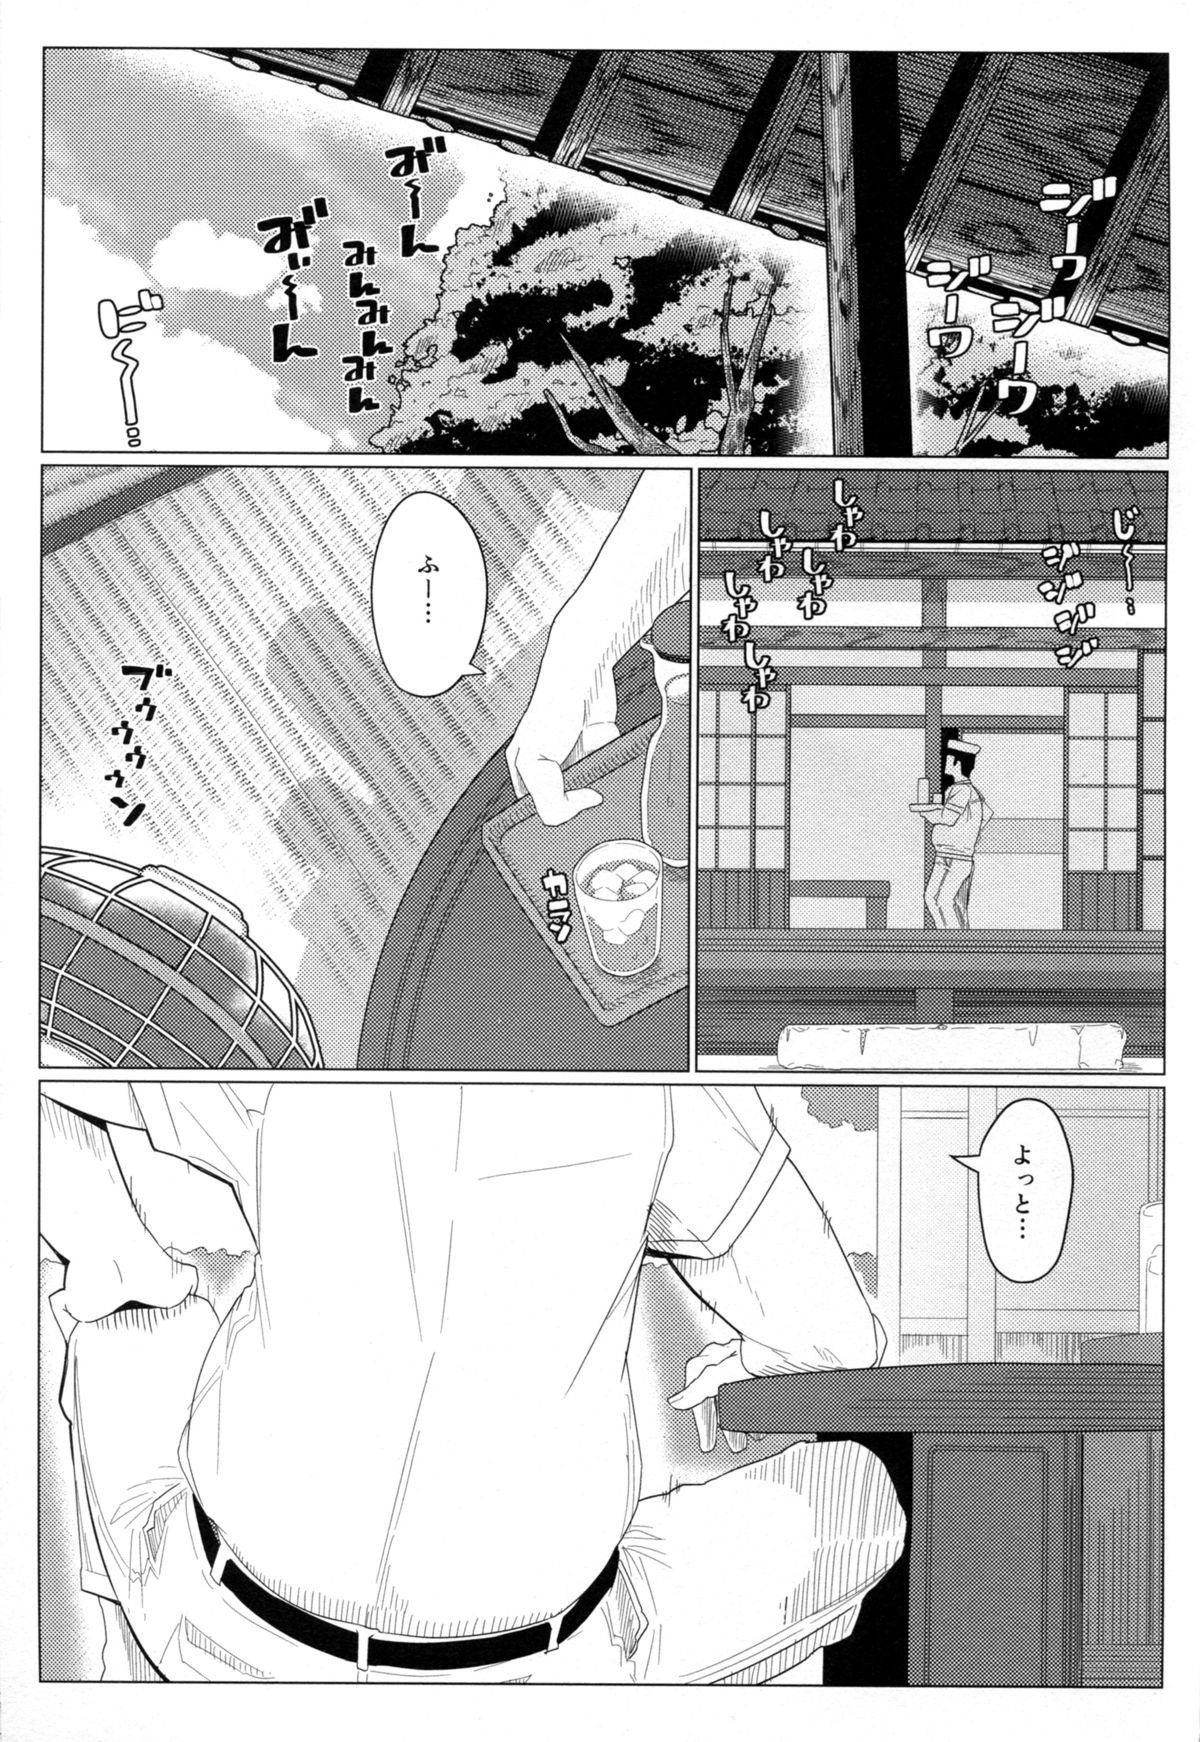 English GIRLFriend’s 9 - Kantai collection Officesex - Page 3